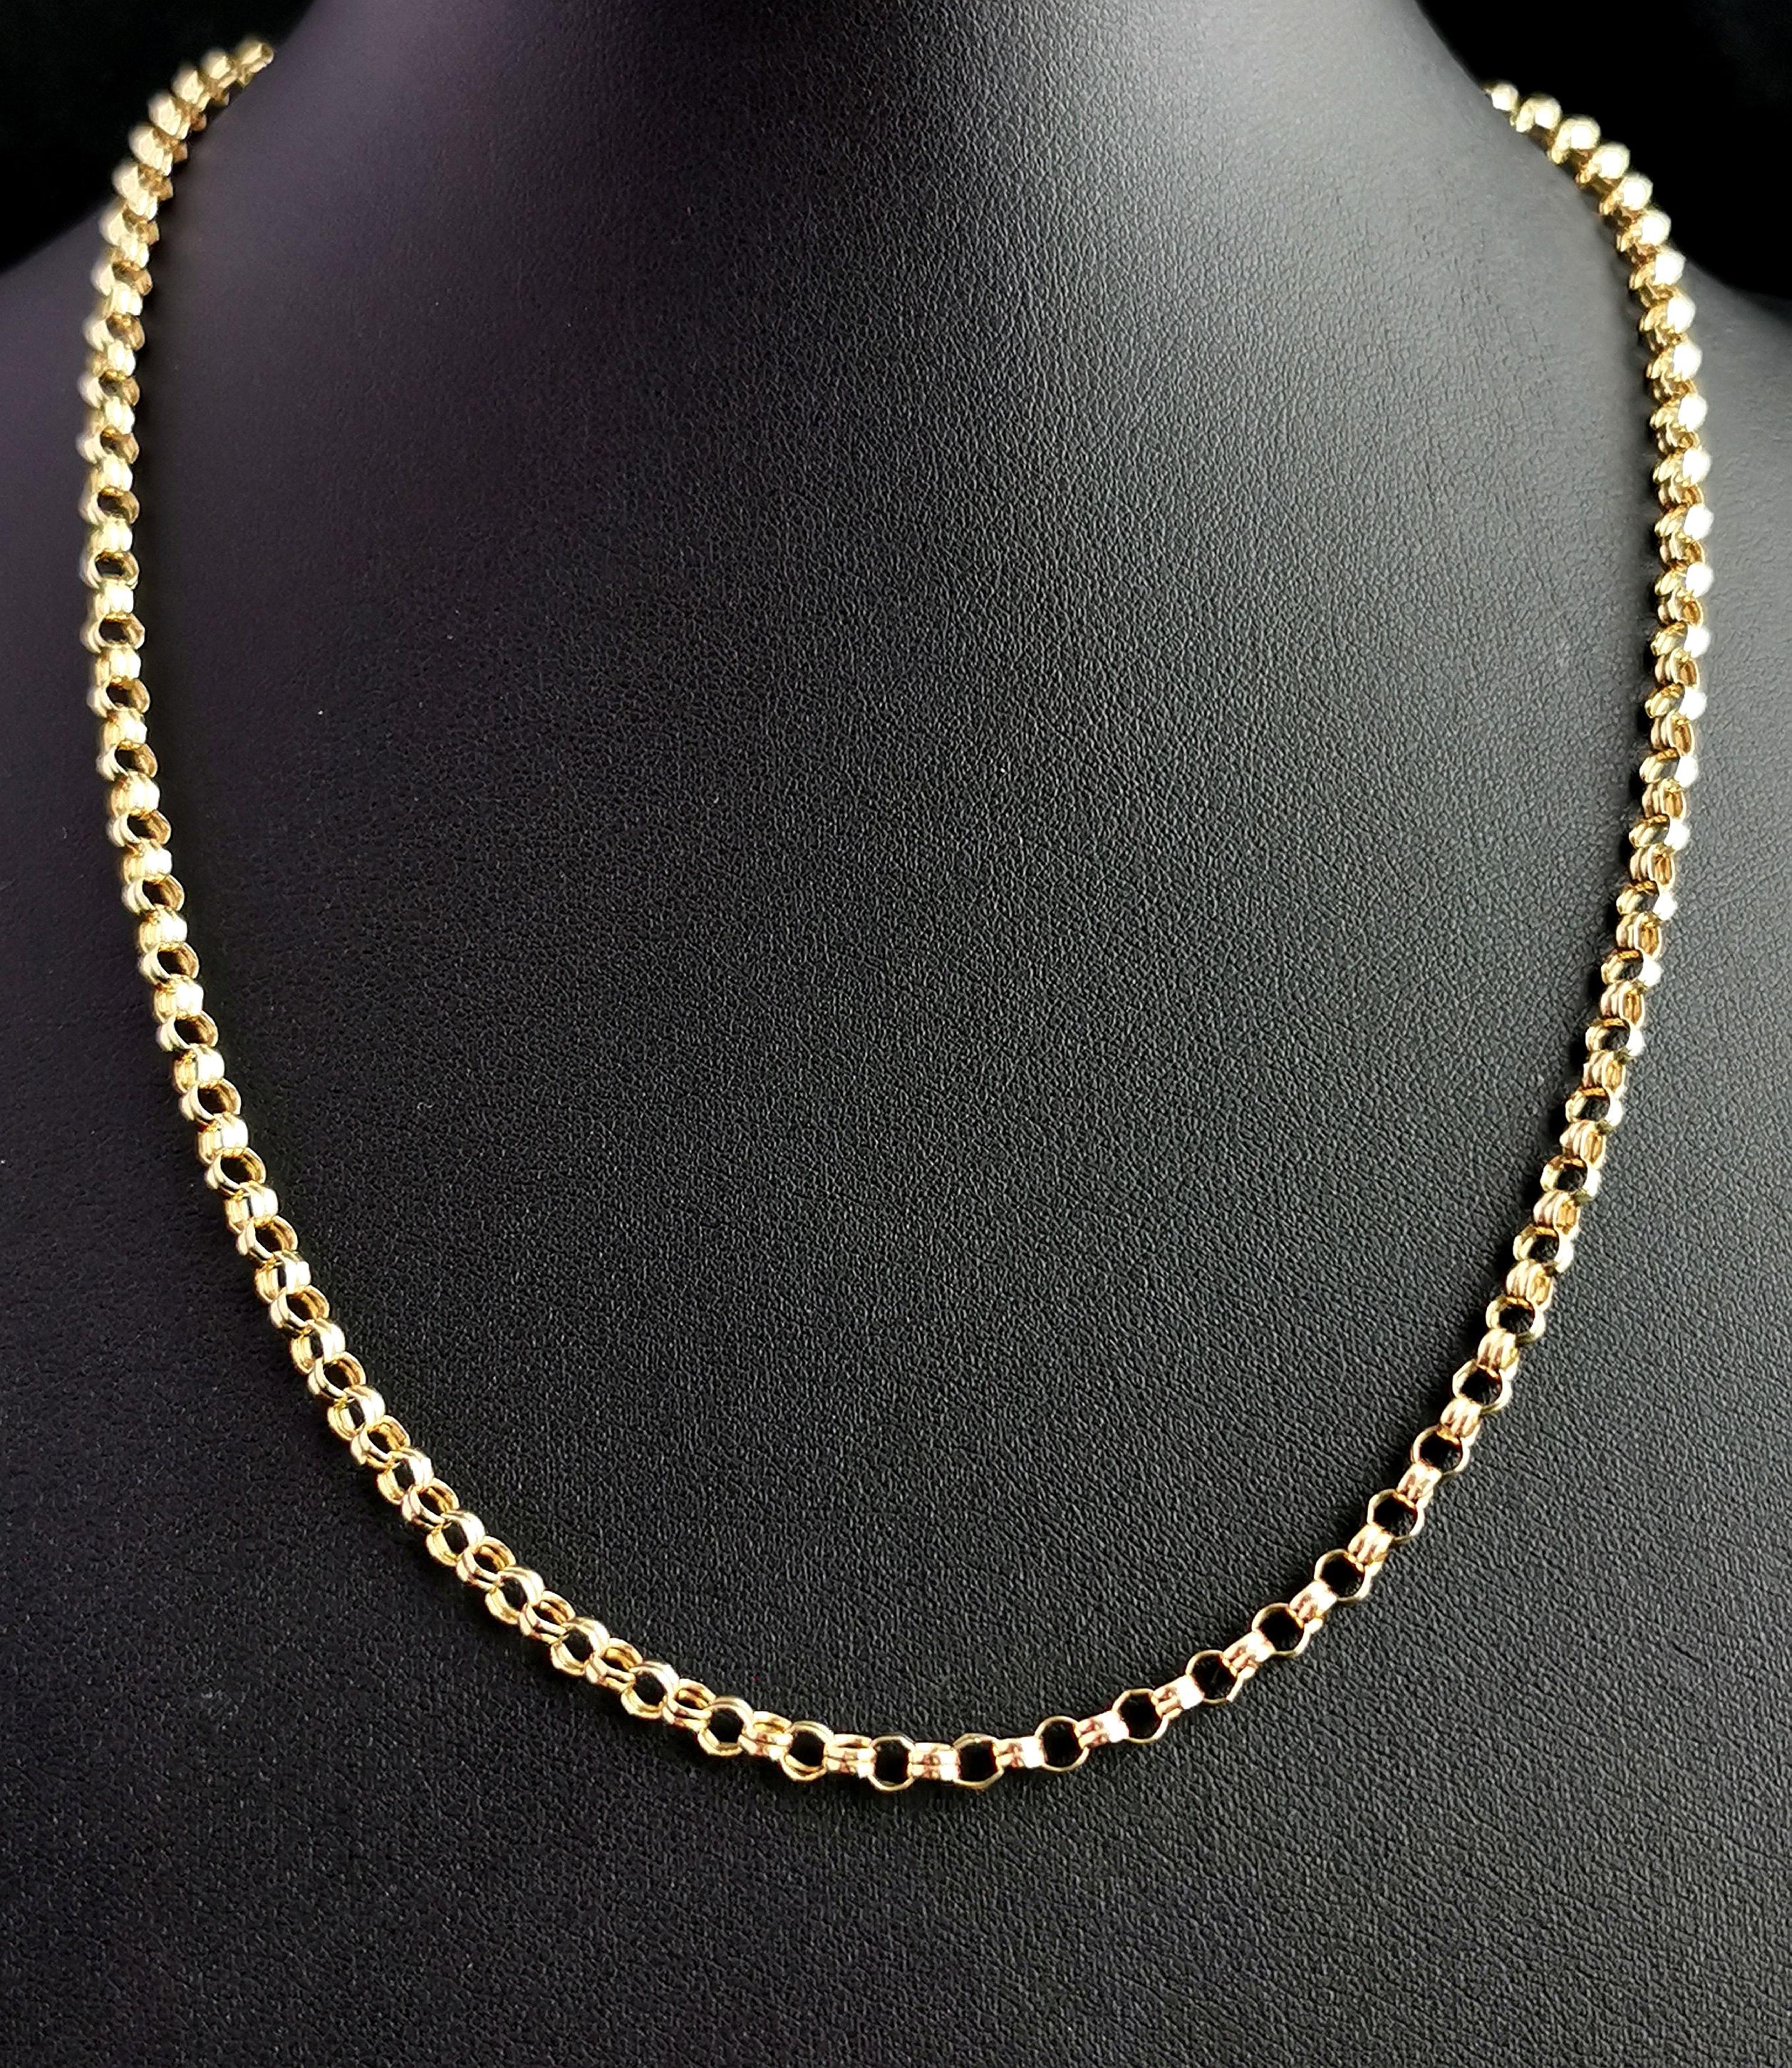 A gorgeous vintage, 90s era 9kt yellow gold rolo link Chain necklace.

Grooved double style rolo links in a rich 9kt yellow gold in a nice wearable length.

This beautiful chain necklace is perfect for layering and fastens with a lobster claw clasp,